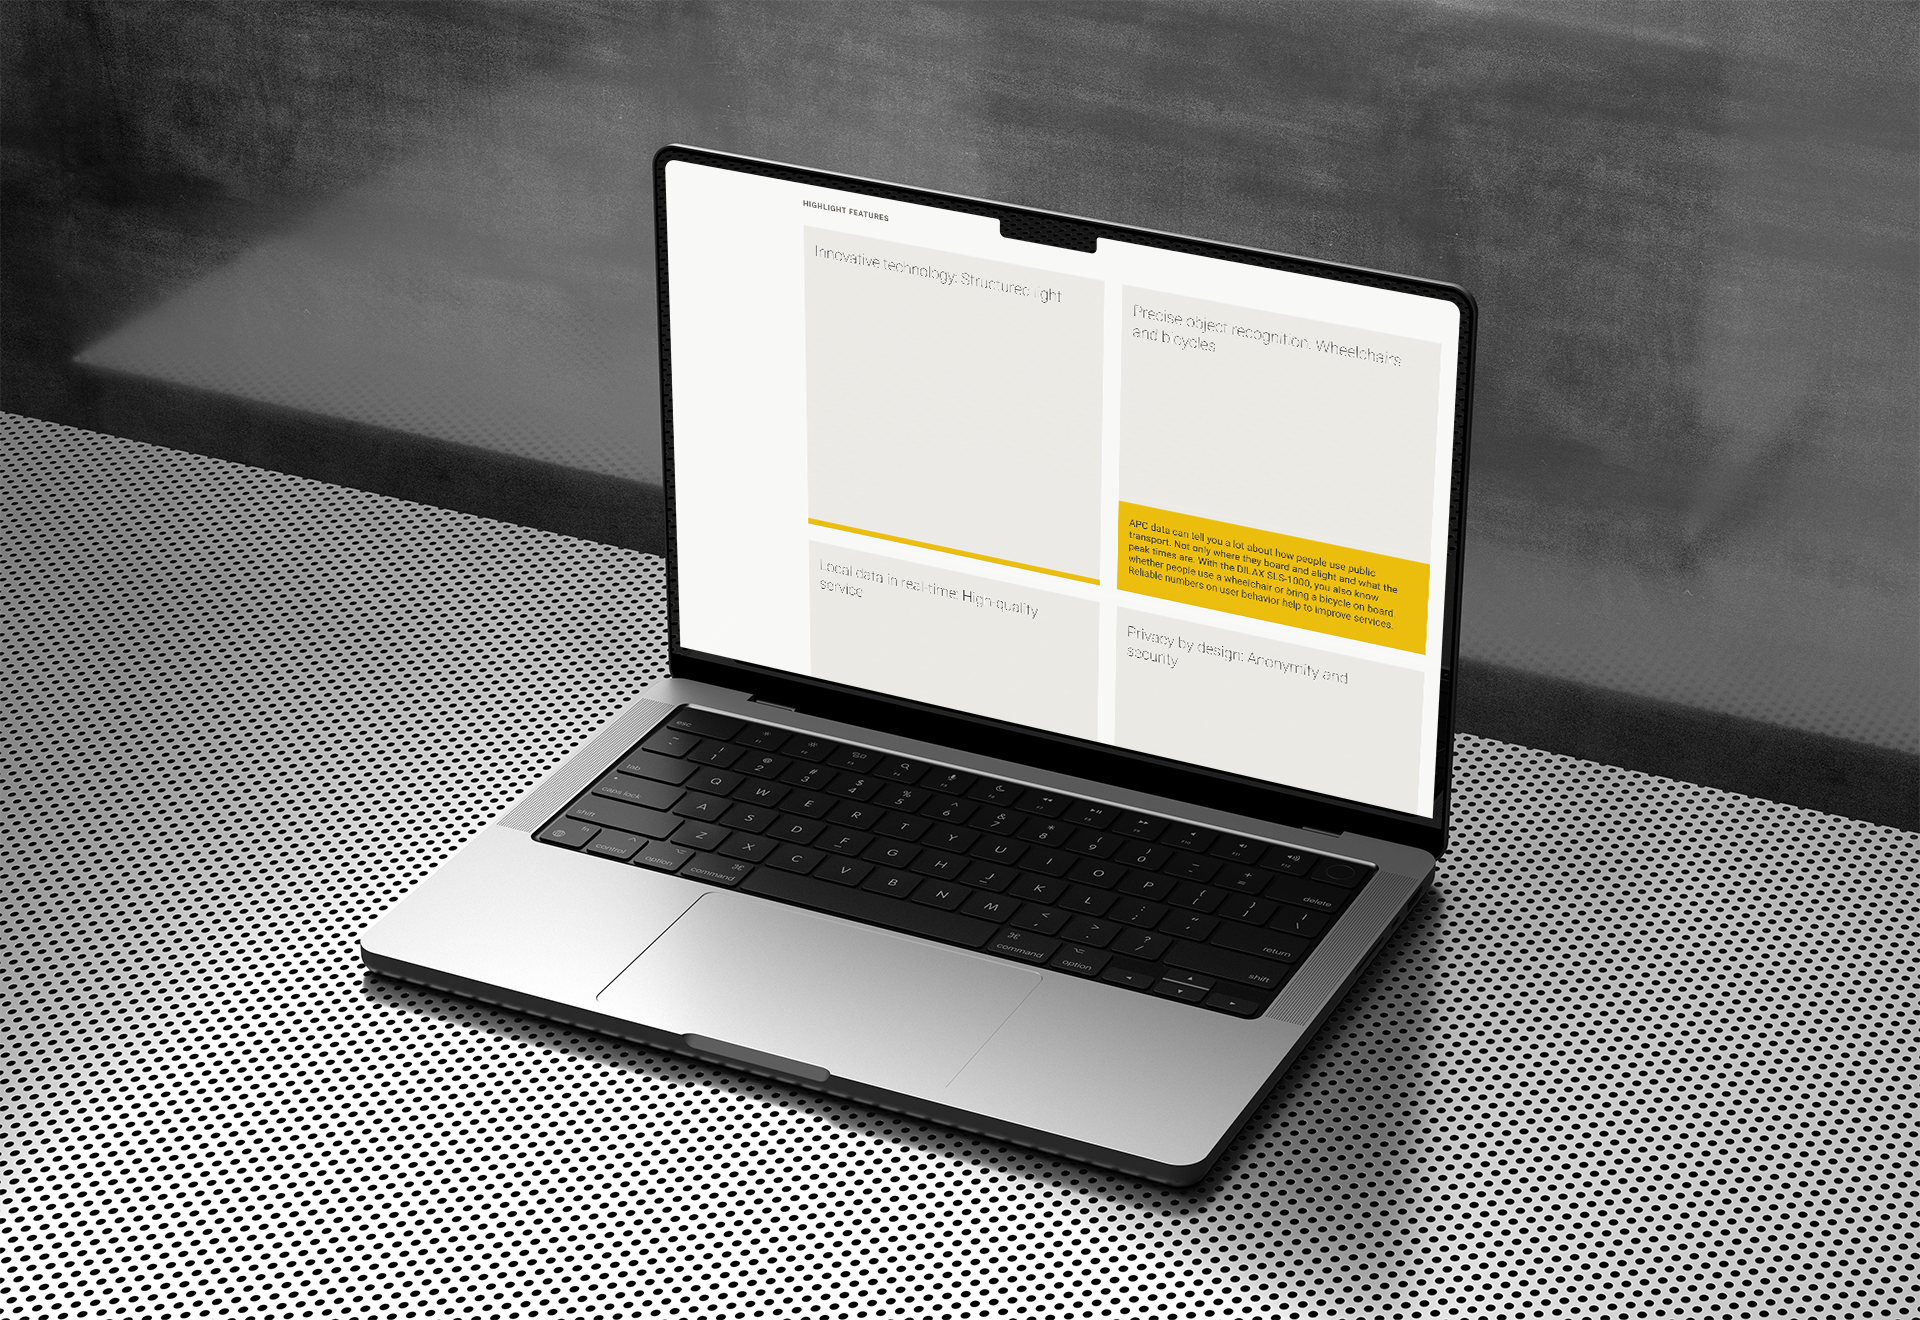 A mockup of a laptop in a cool metallic environment. The screen shows a very clean website consisting of four grey square navigaiton tiles on the right with some text in a smaller yellow section.